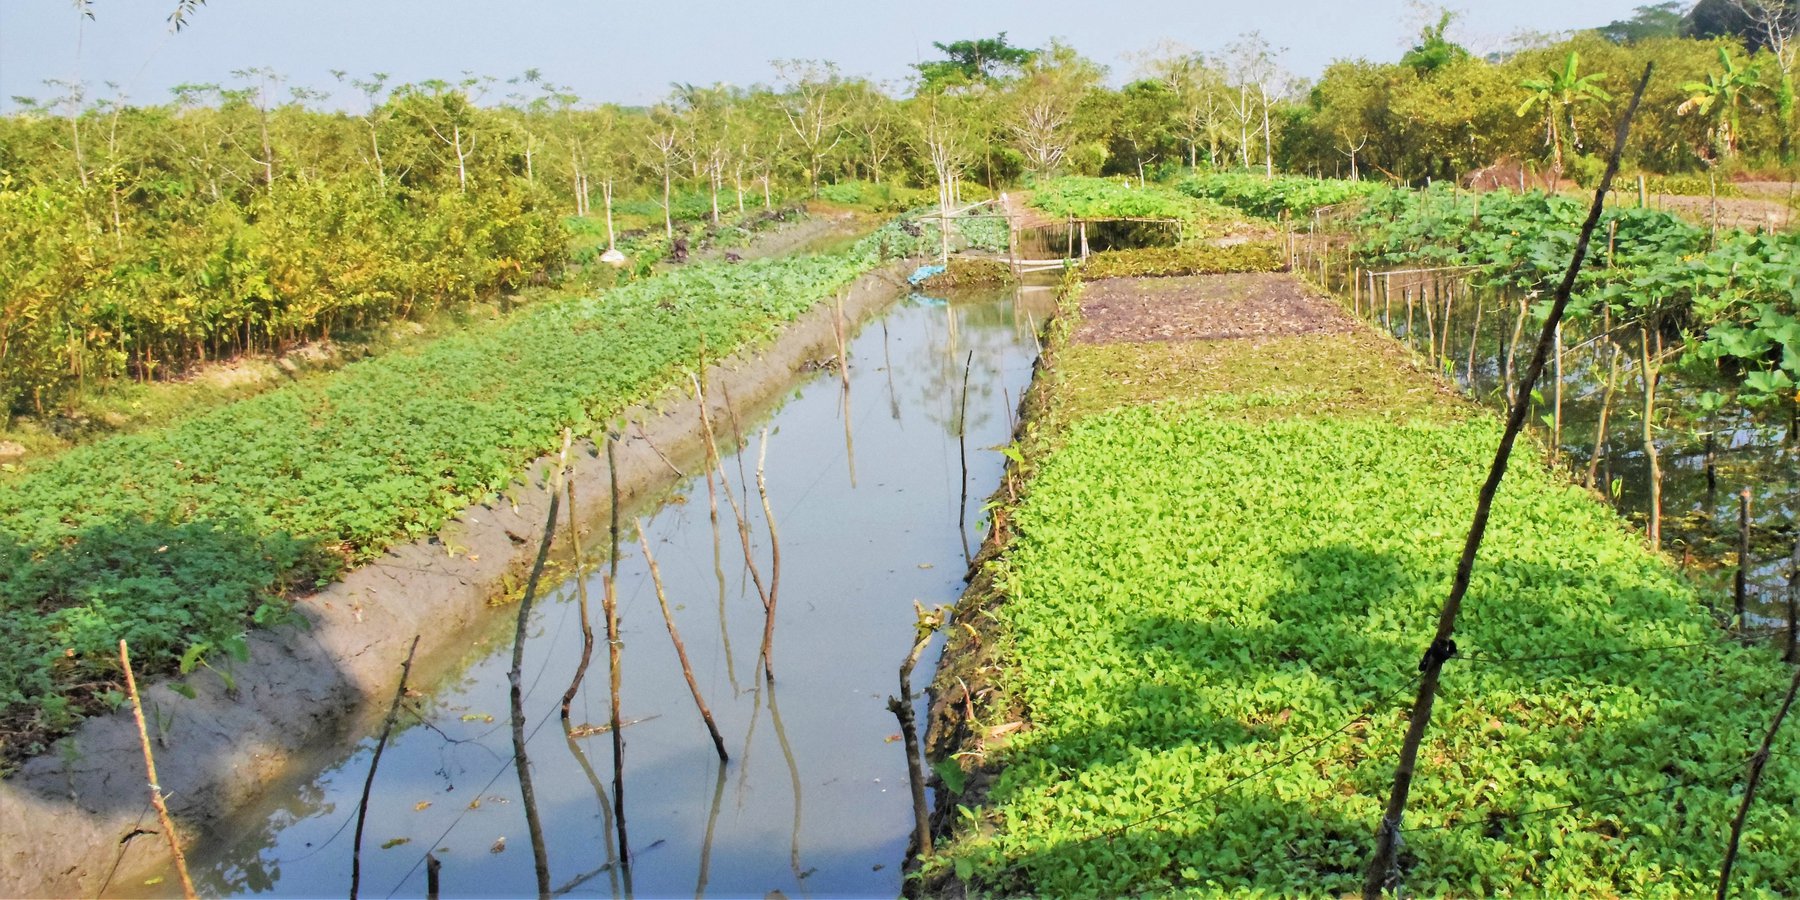 Typical Dyke and Ditch (Kandi-Berh) crop management system of Swarupkathi